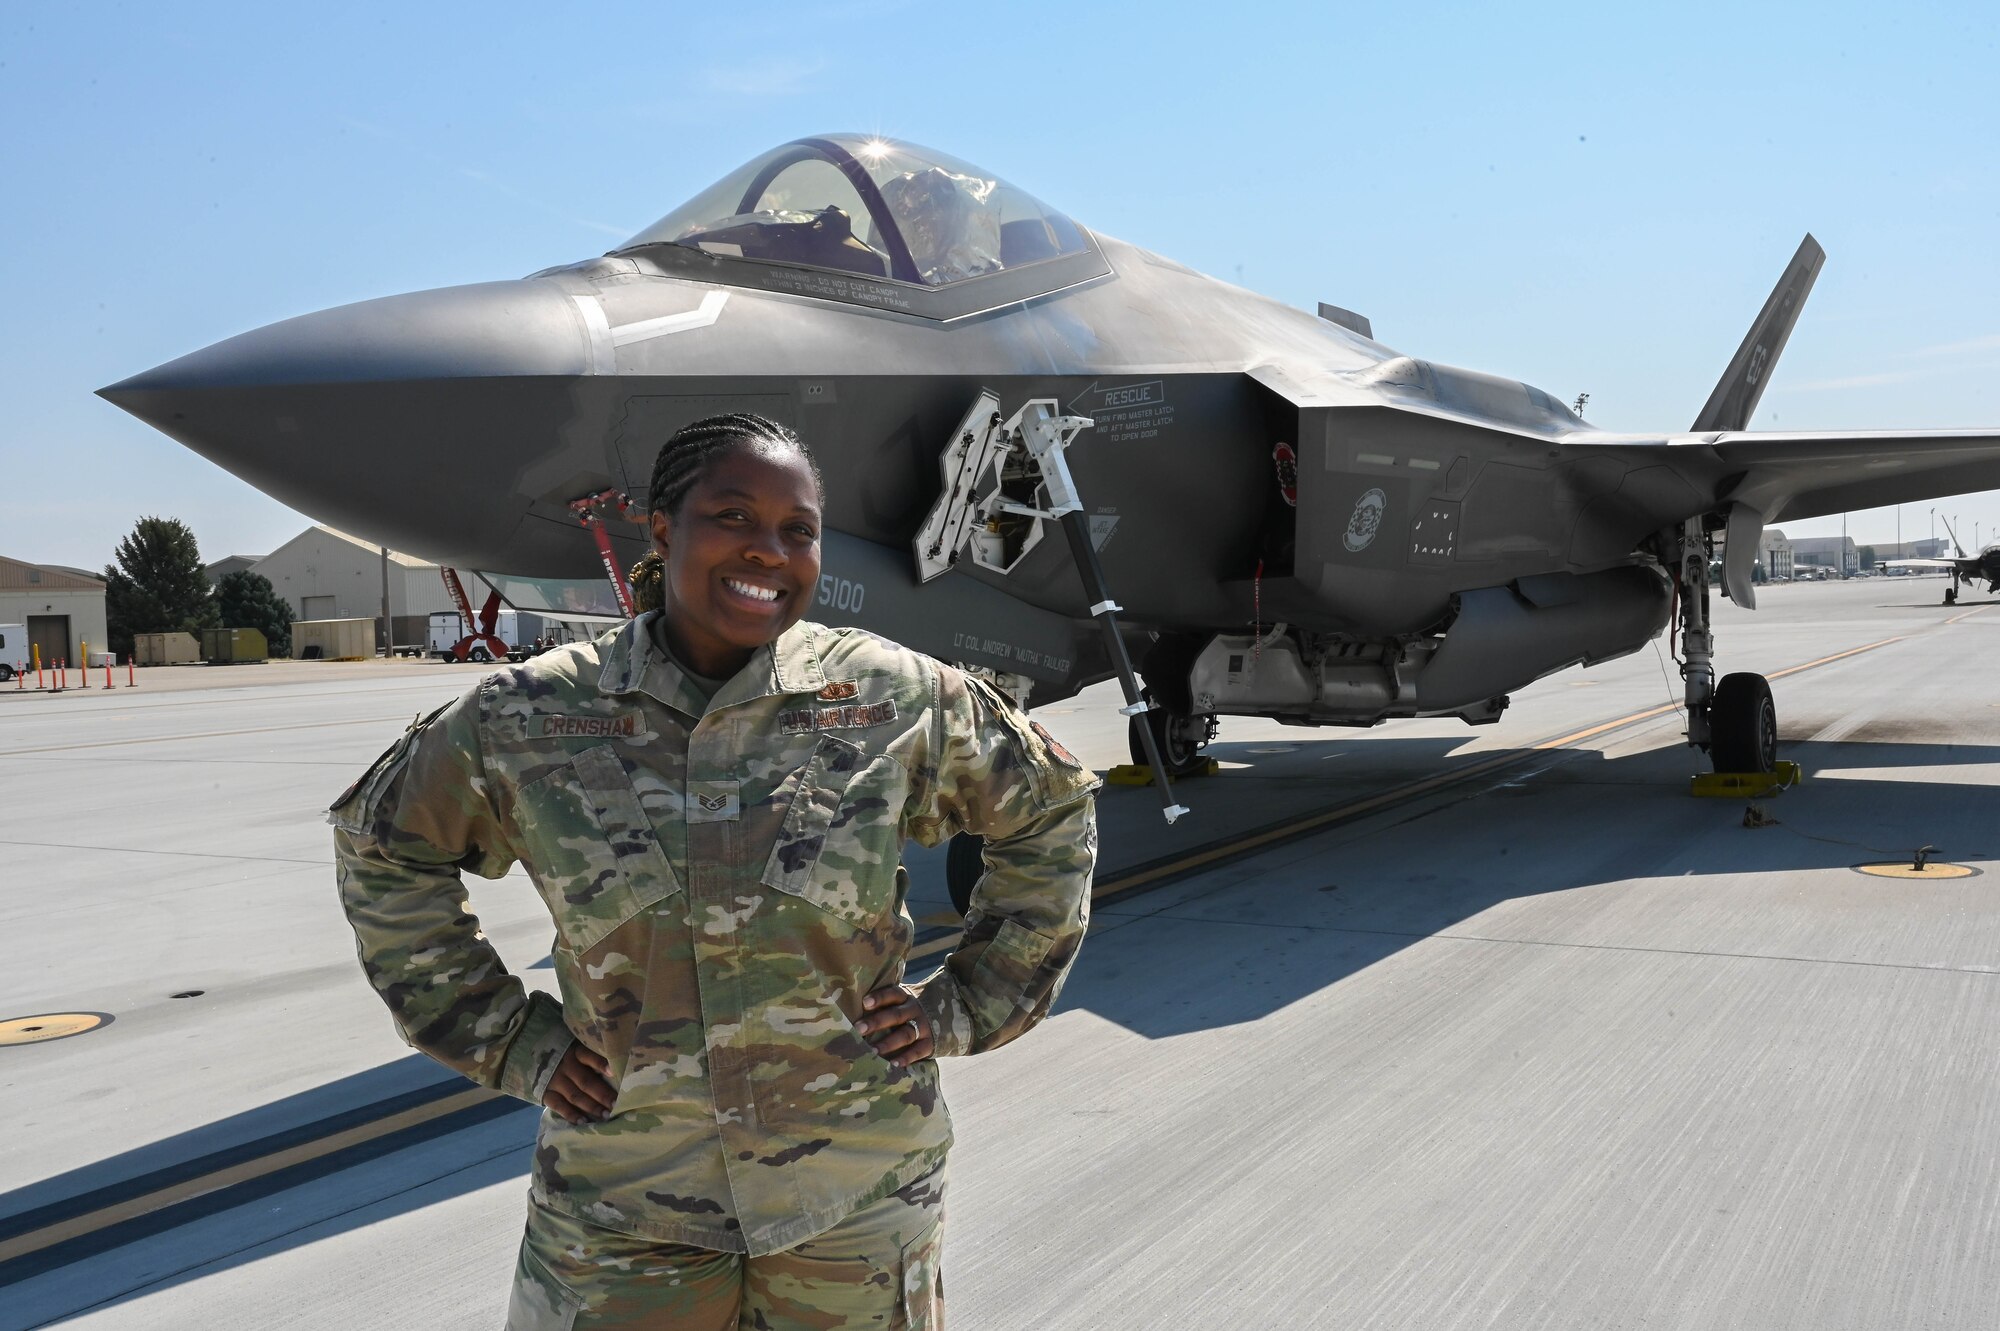 The 60th FS went to Mountain Home AFB to conduct the flying training mission.